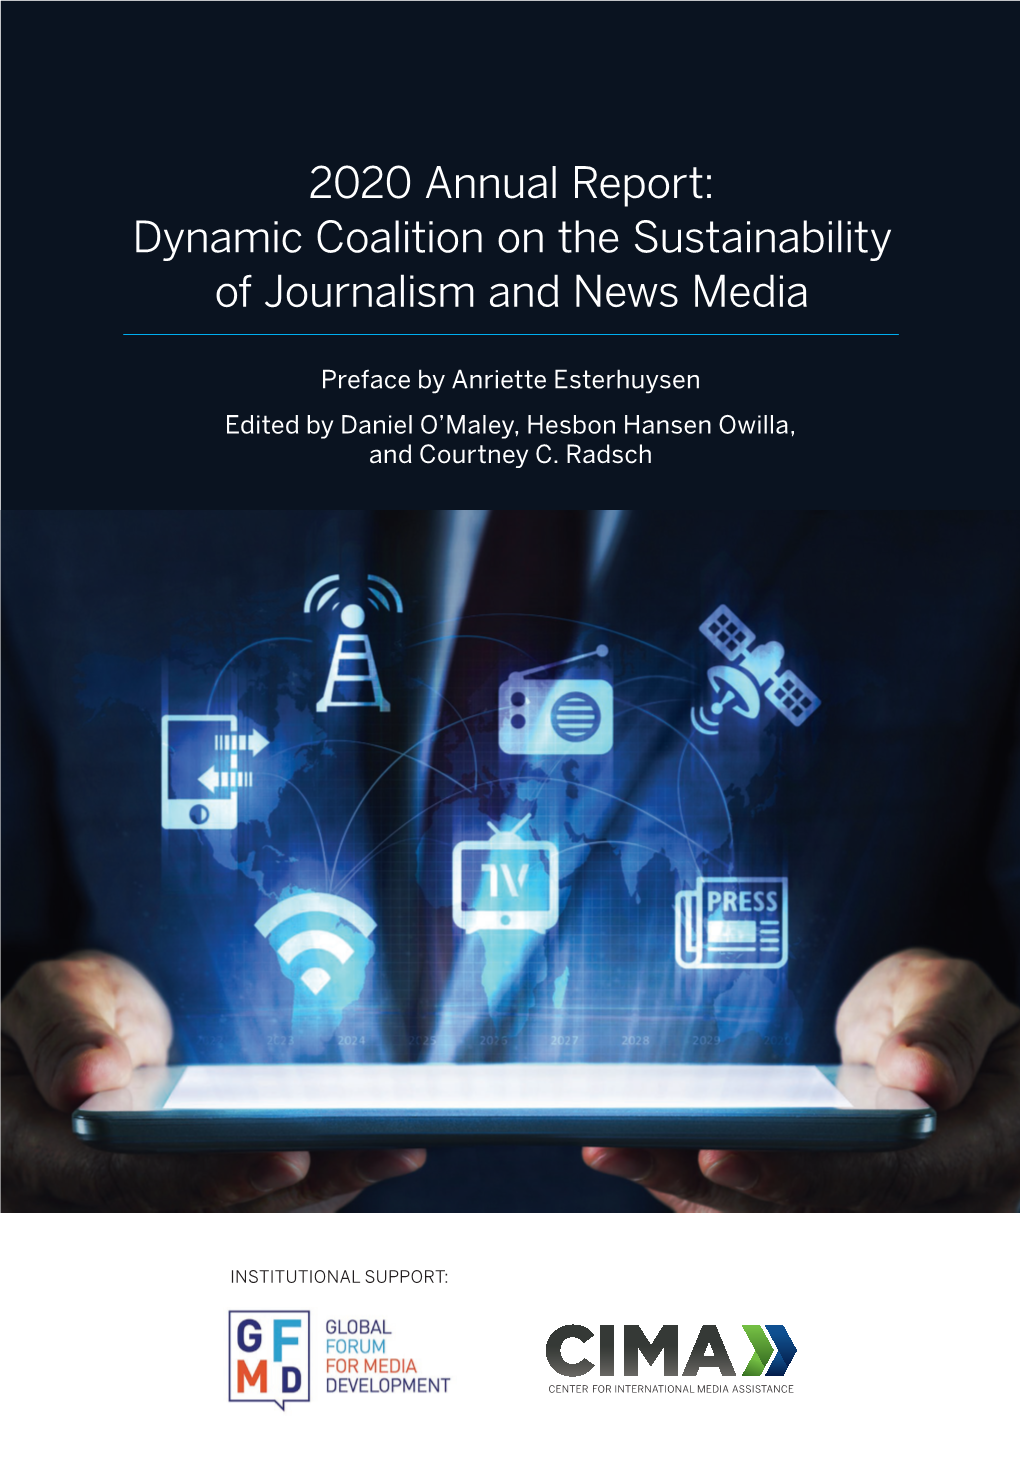 Dynamic Coalition on the Sustainability of Journalism and News Media